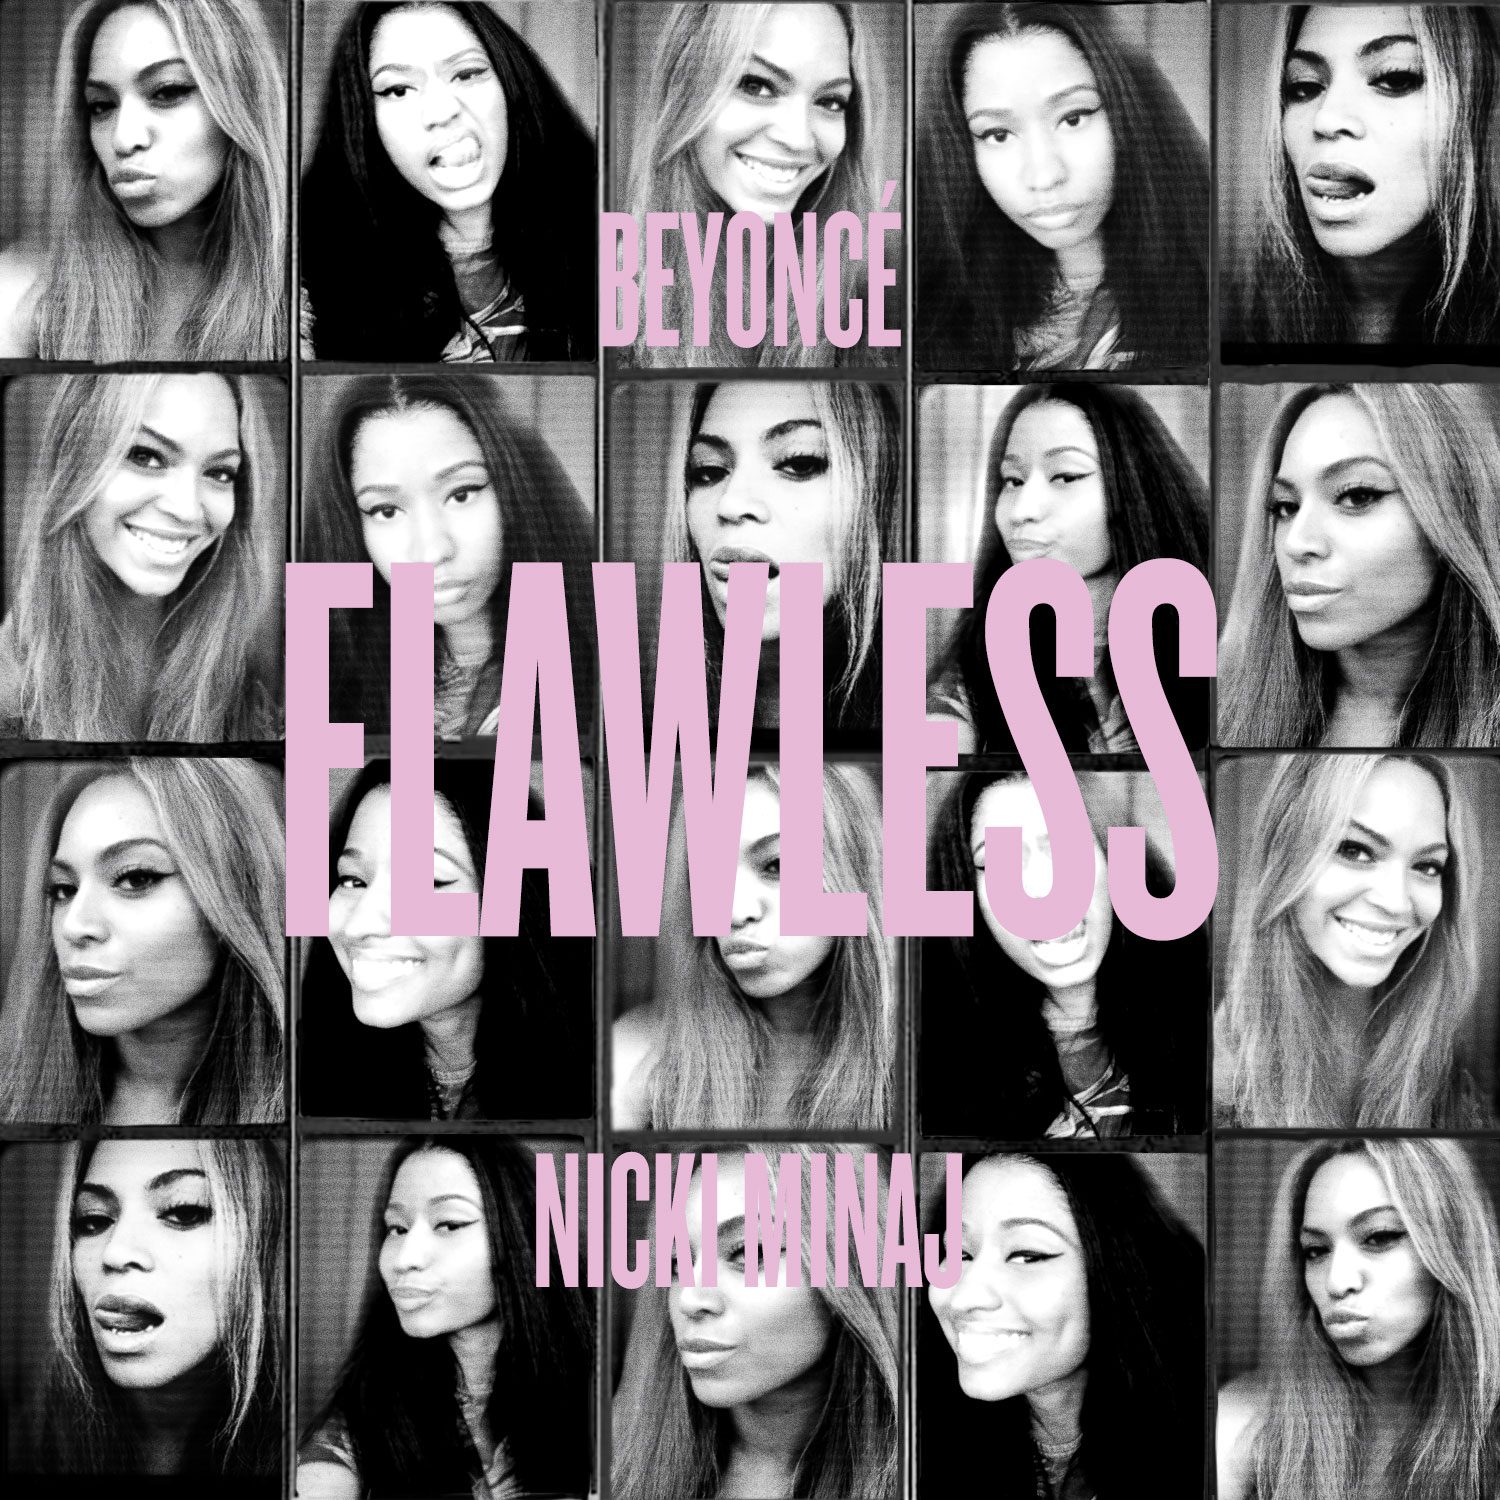 They Are Flawless Official Beyonce Remix with Nicki Minaj